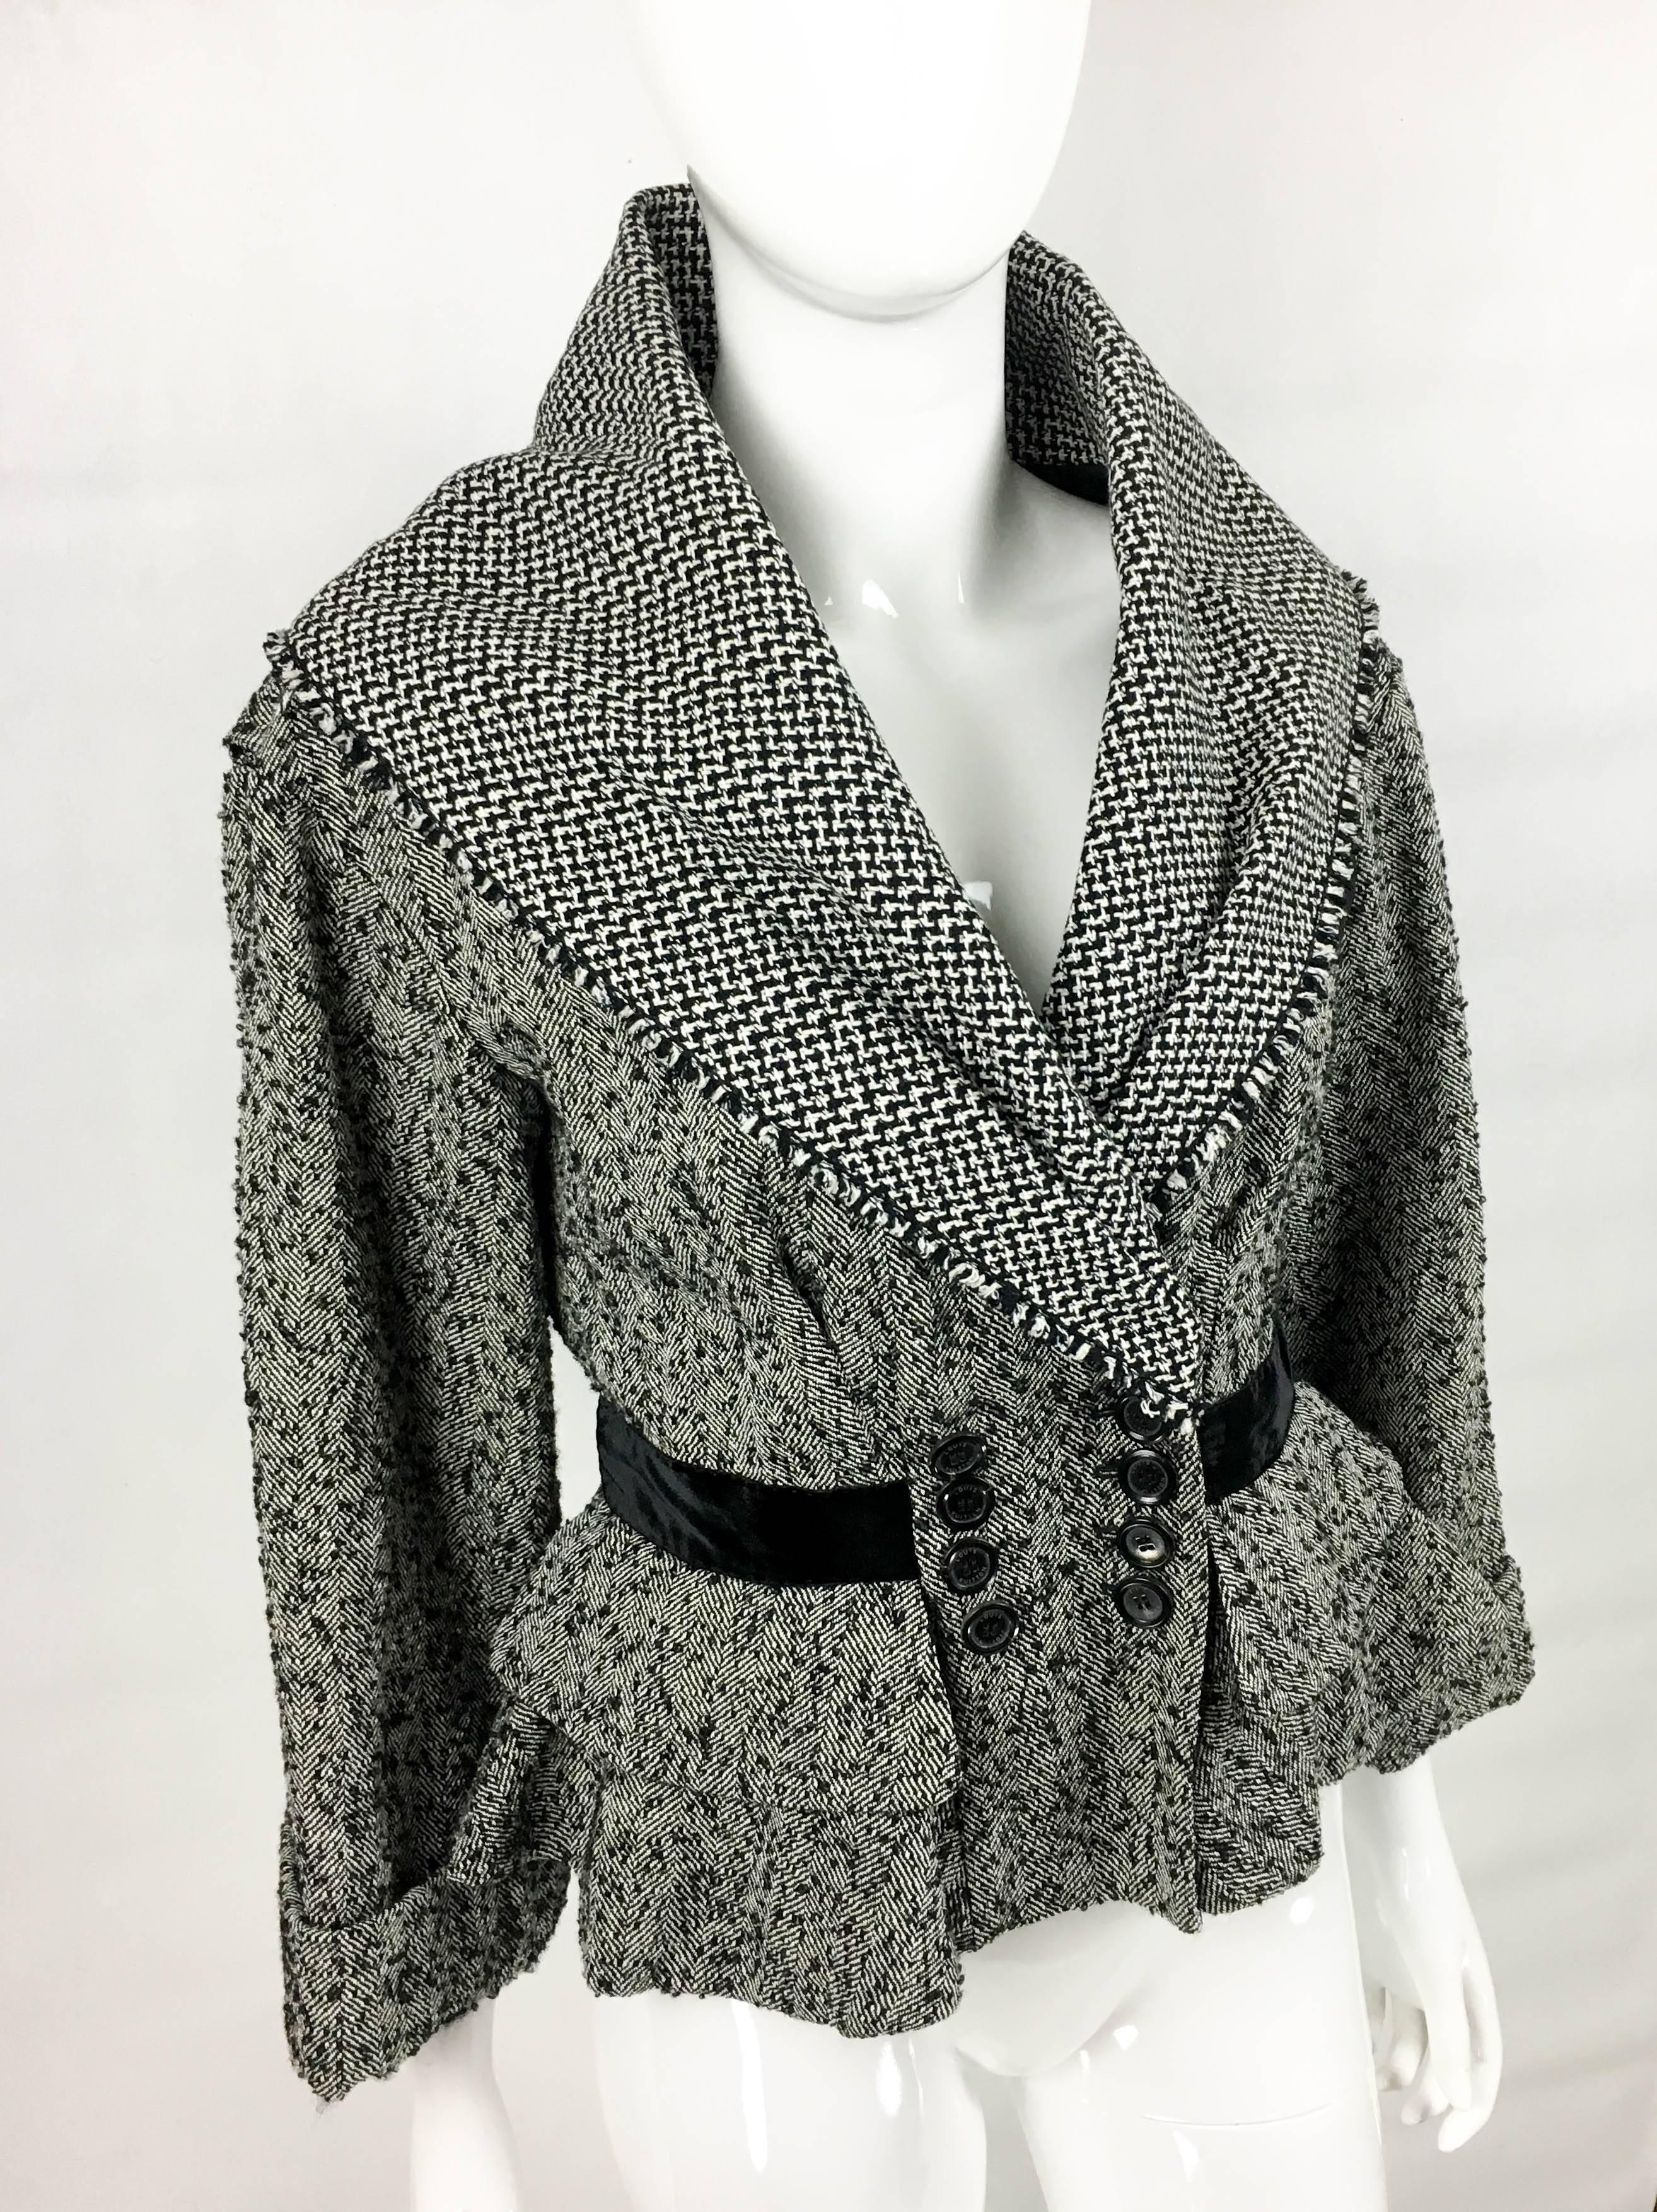 Louis Vuitton Black and White Tweed Jacket With Dramatic Collar - 21st Century 1